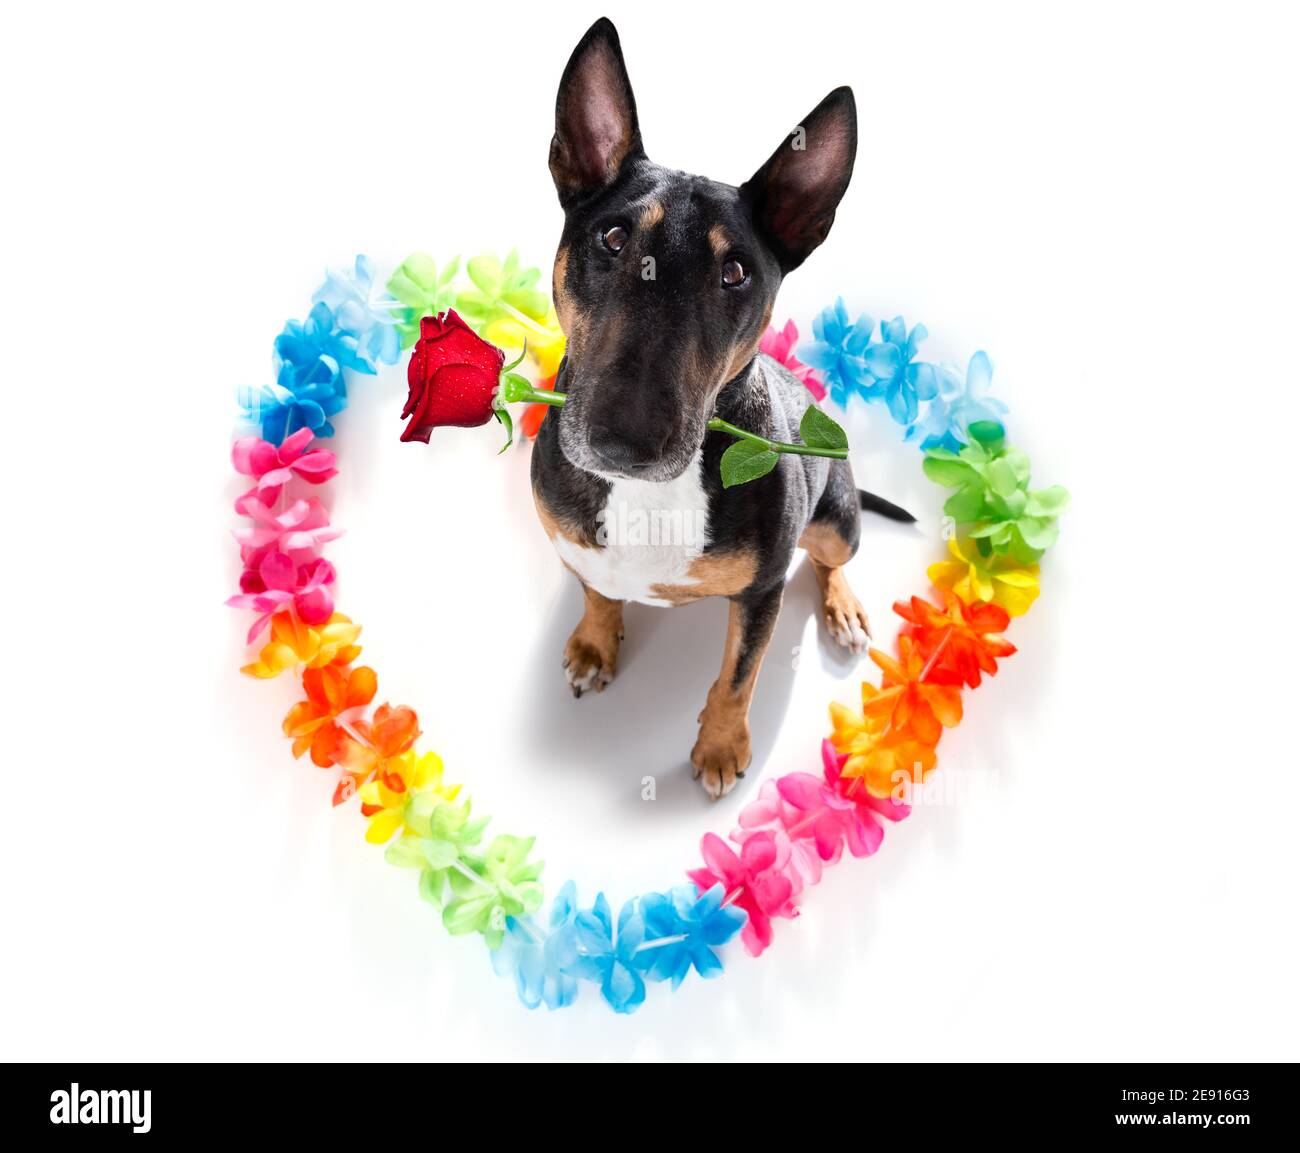 Miniature Bull Terrier dog on valentines love heart shape with I love you sign as background isolated on white Stock Photo